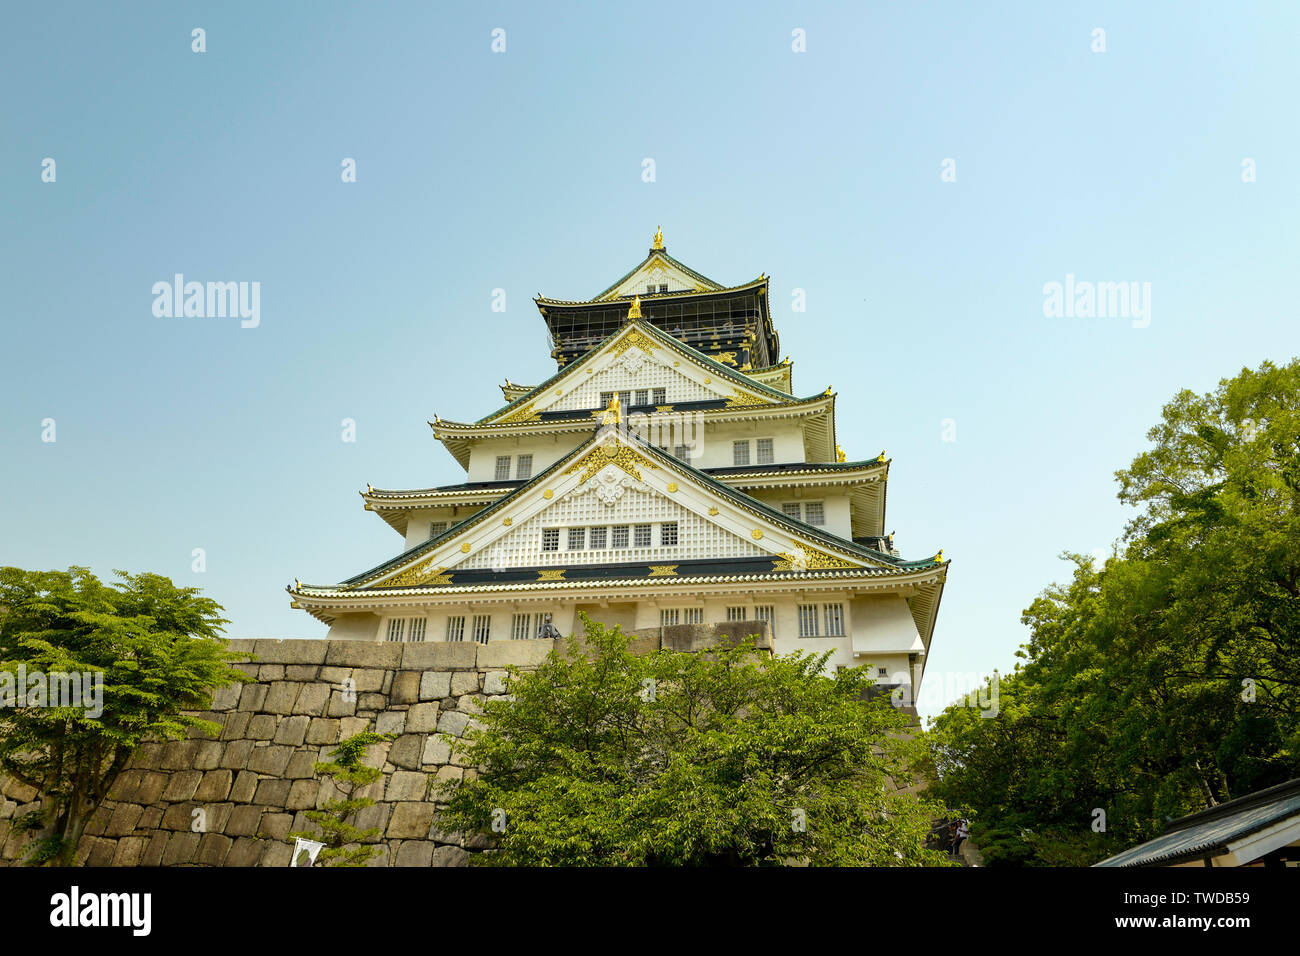 Osaka, Japan, 29th, May, 2017. Osaka Castle, the Central tower. The castle is one of Japan's most famous landmarks. Viewed from Nishinomaru Garden. Stock Photo